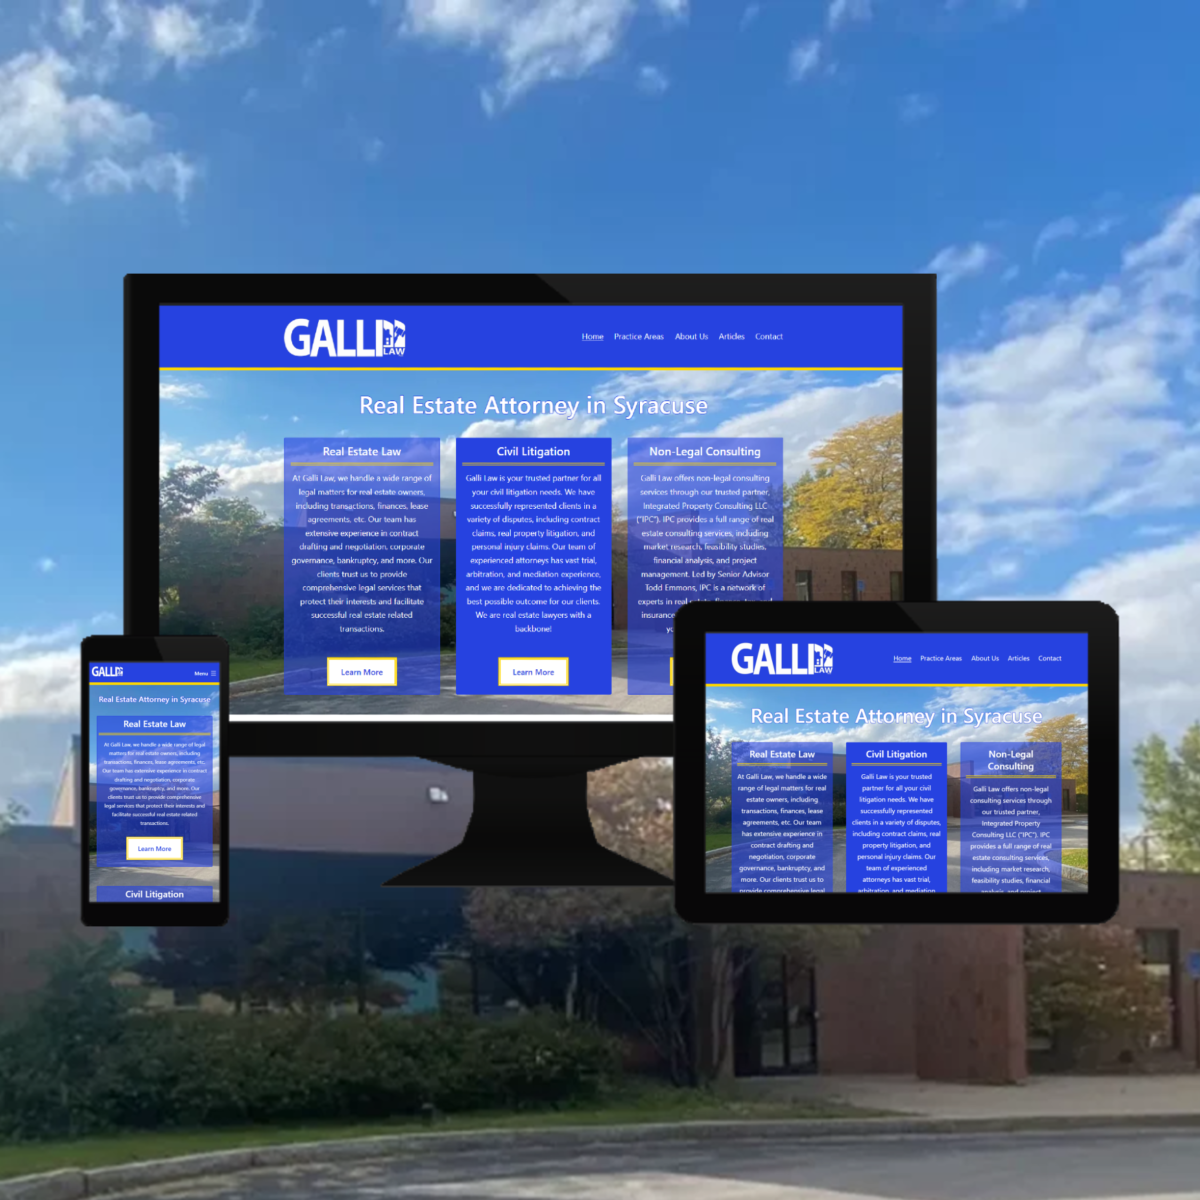 galli law website and seo in syracuse ny